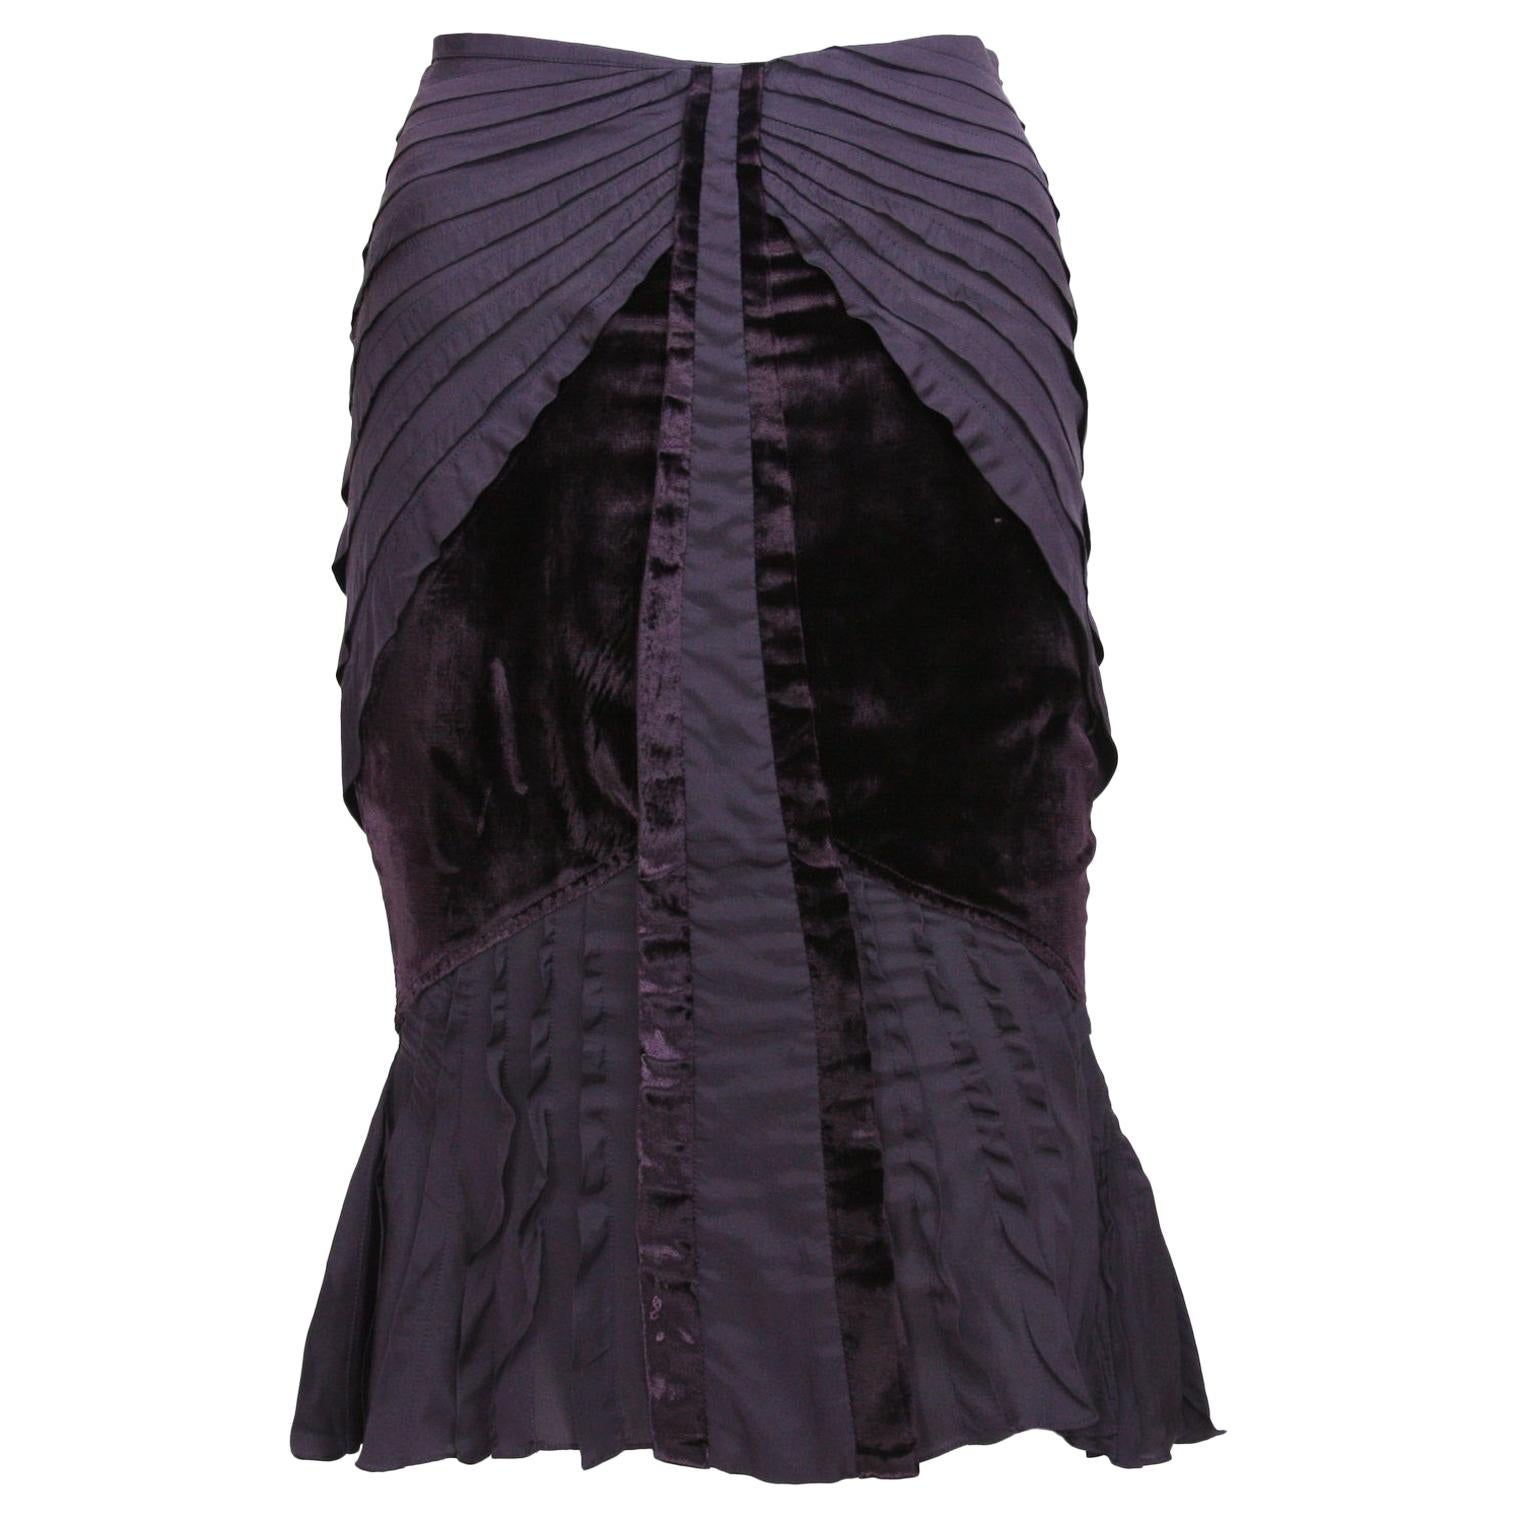 Tom Ford for Gucci F/W 2004 Collection Silk Velvet Purple Pleated Skirt 42 - 6